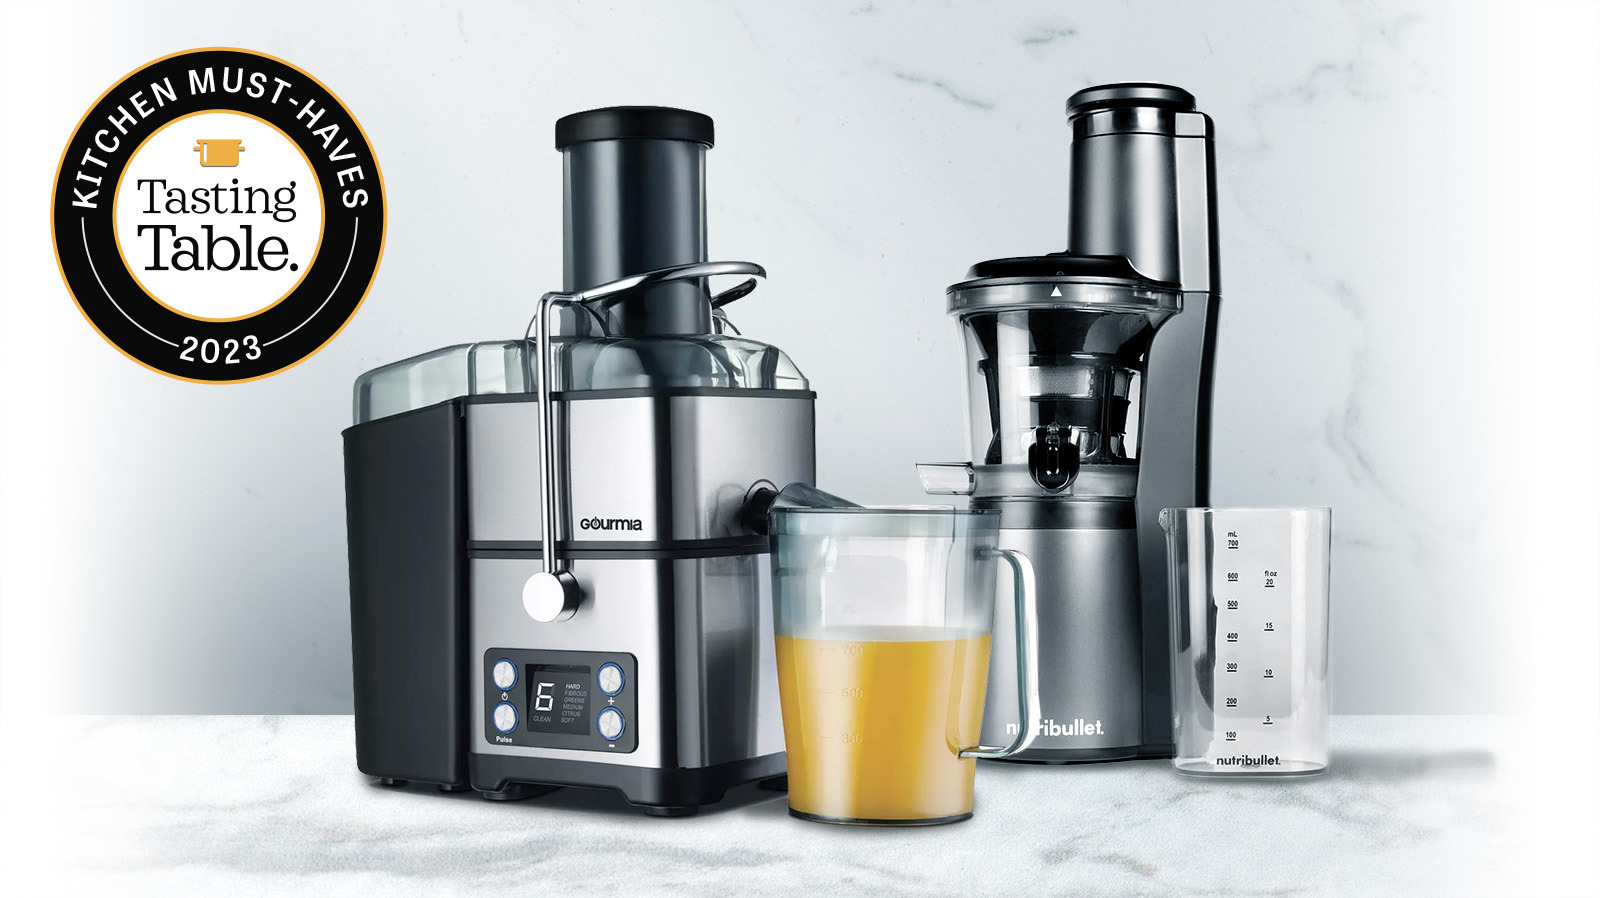 The 7 Best High-End Juicers to Buy Right Now – Robb Report